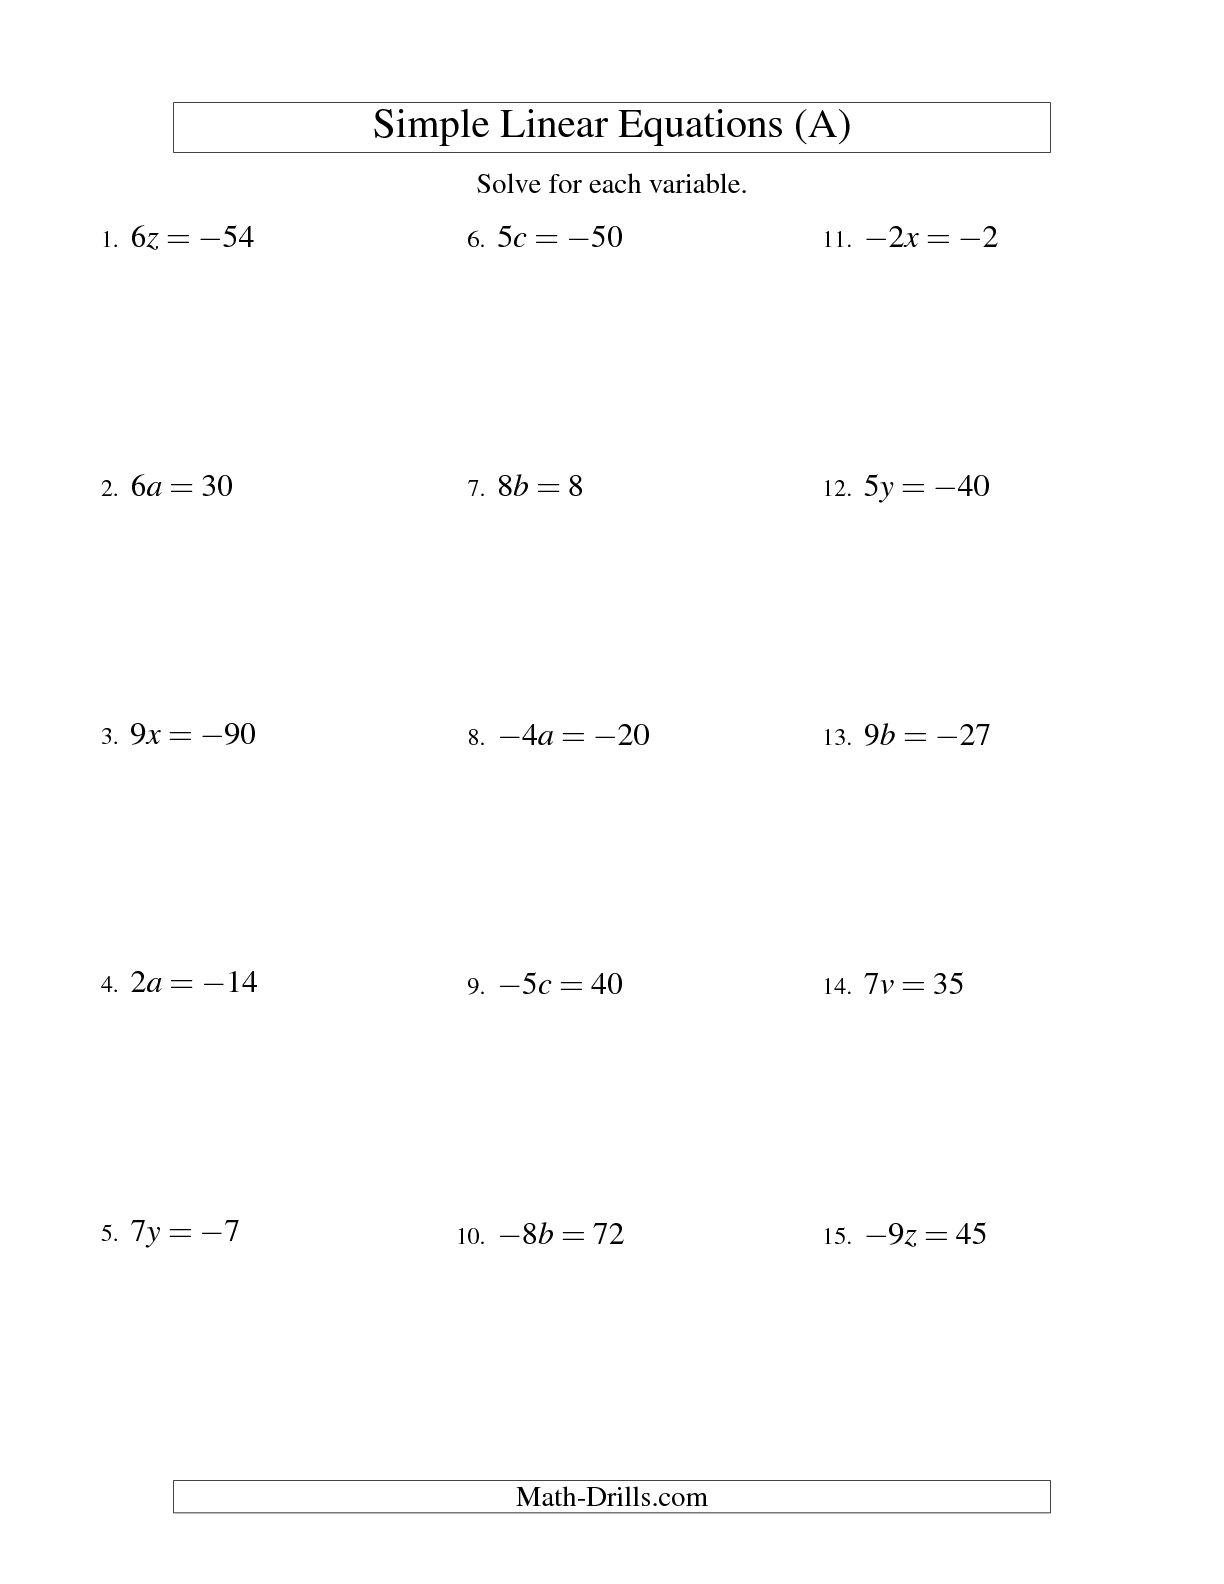 Solving Linear Equations Worksheets Image